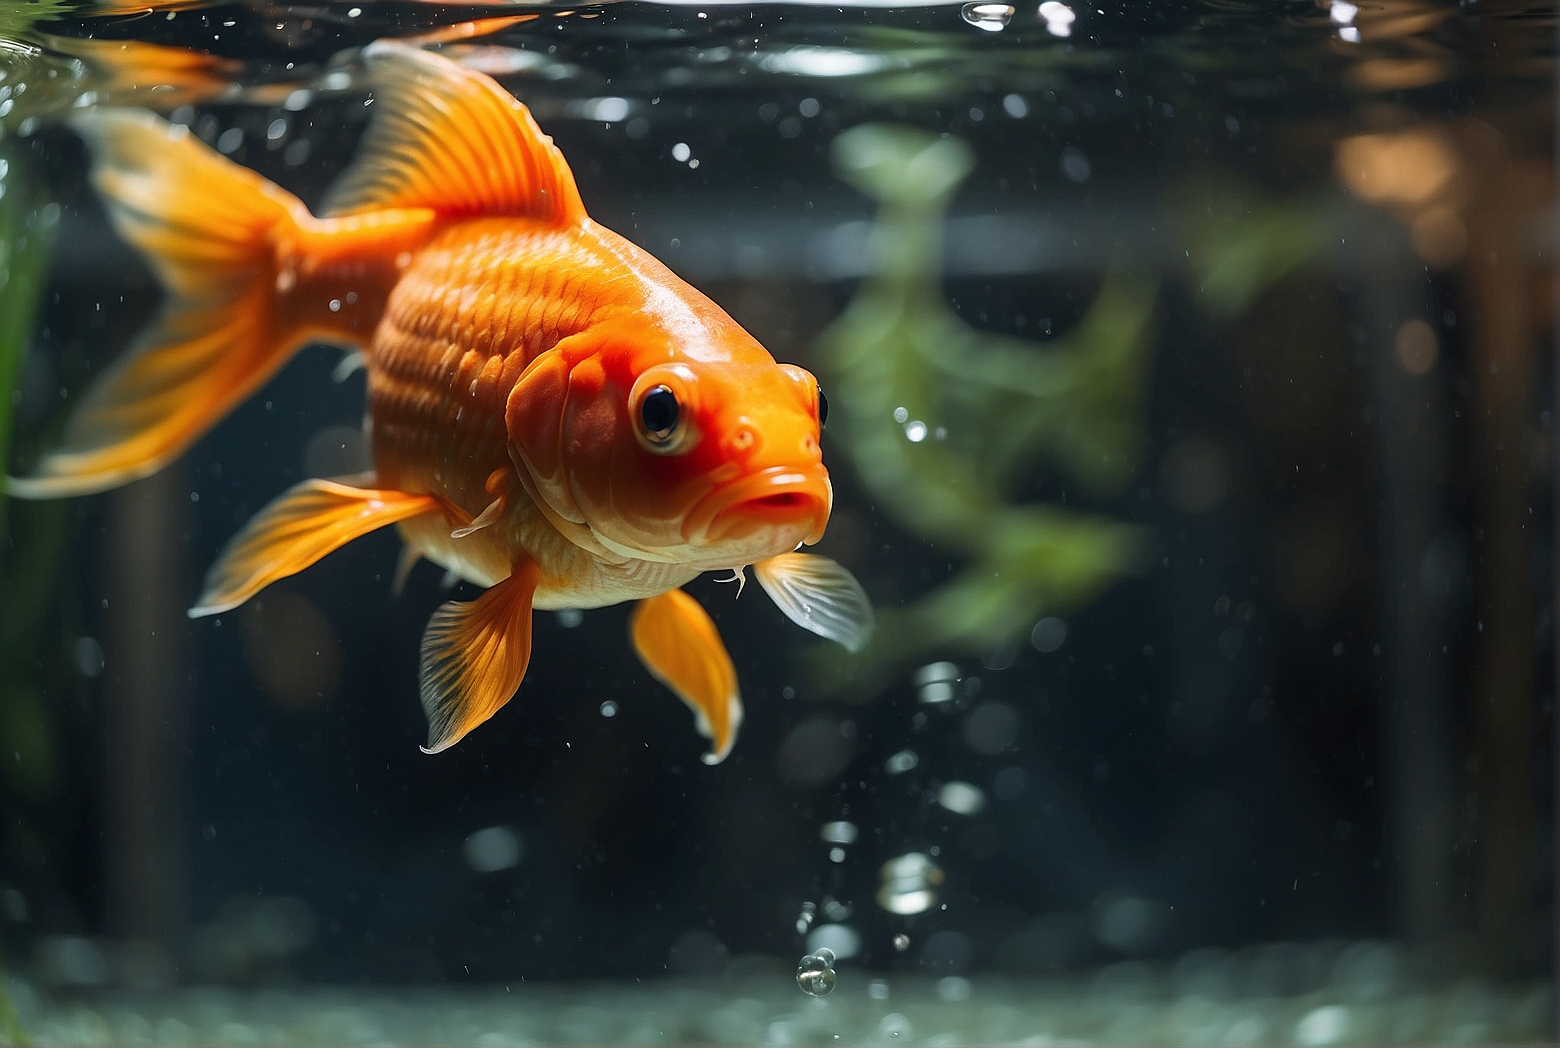 Can Goldfish Survive in Tap Water